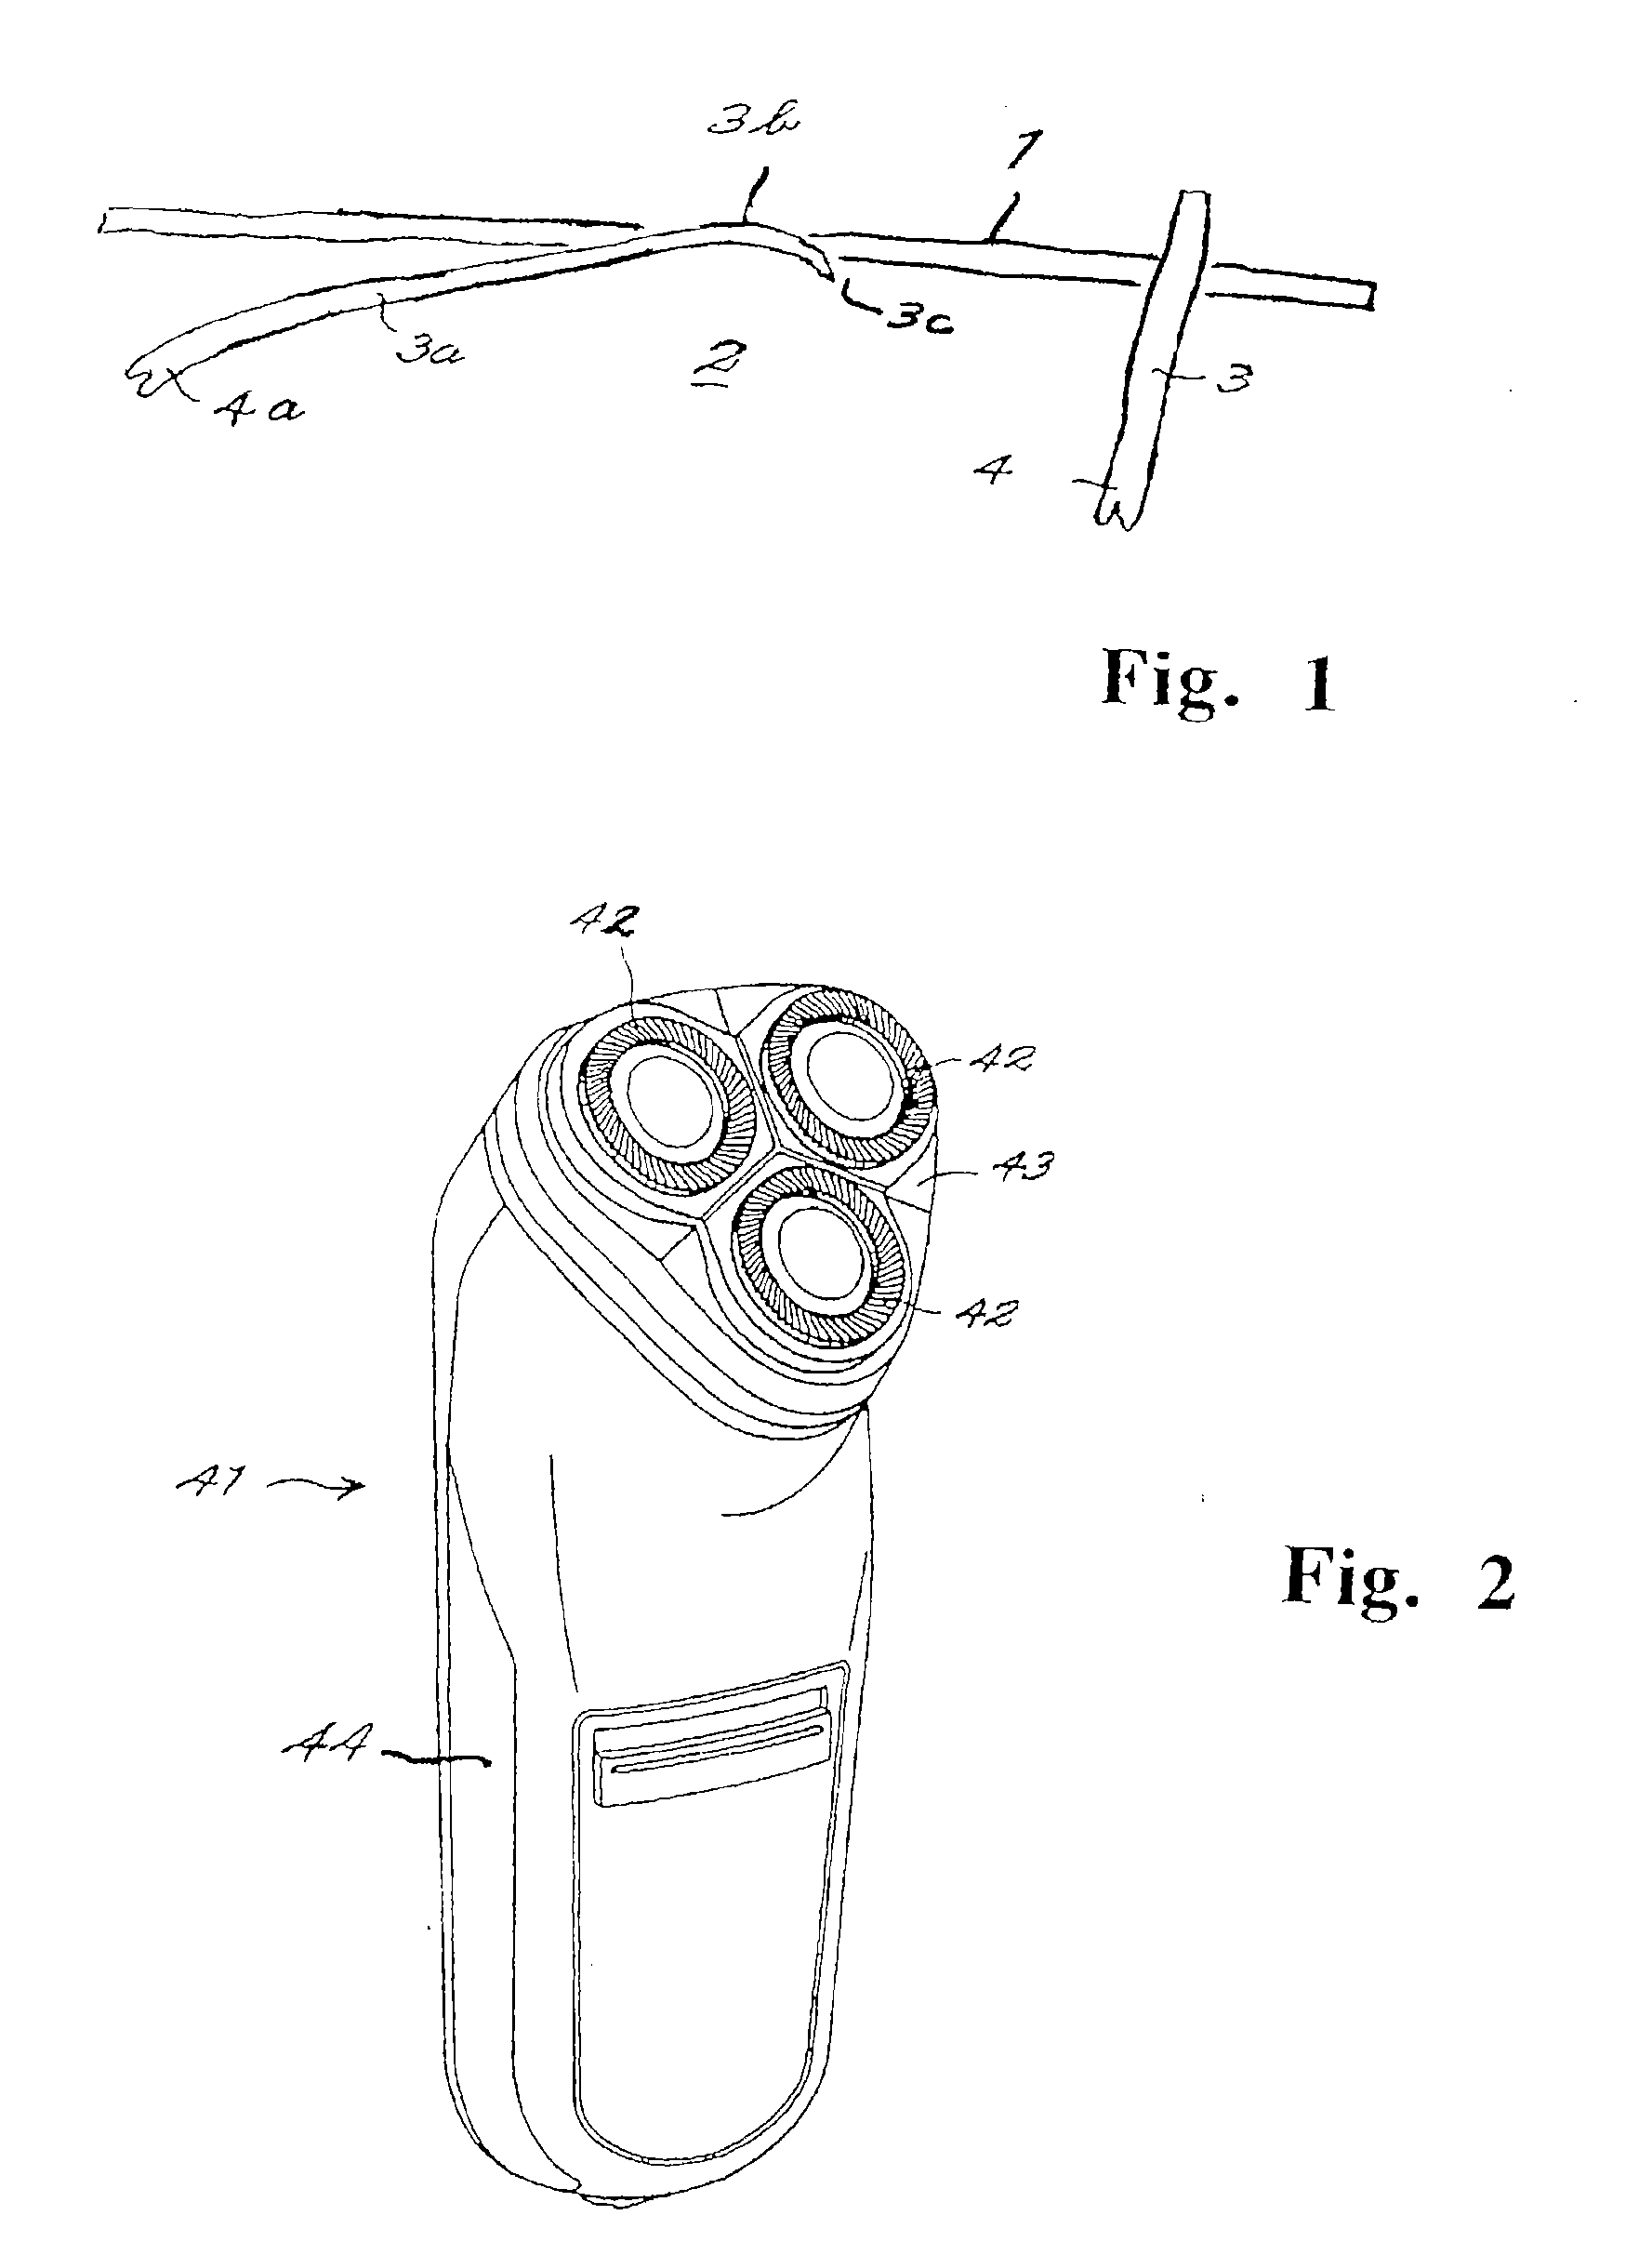 Cutter blade assembly and dry shaver for variable height of cut